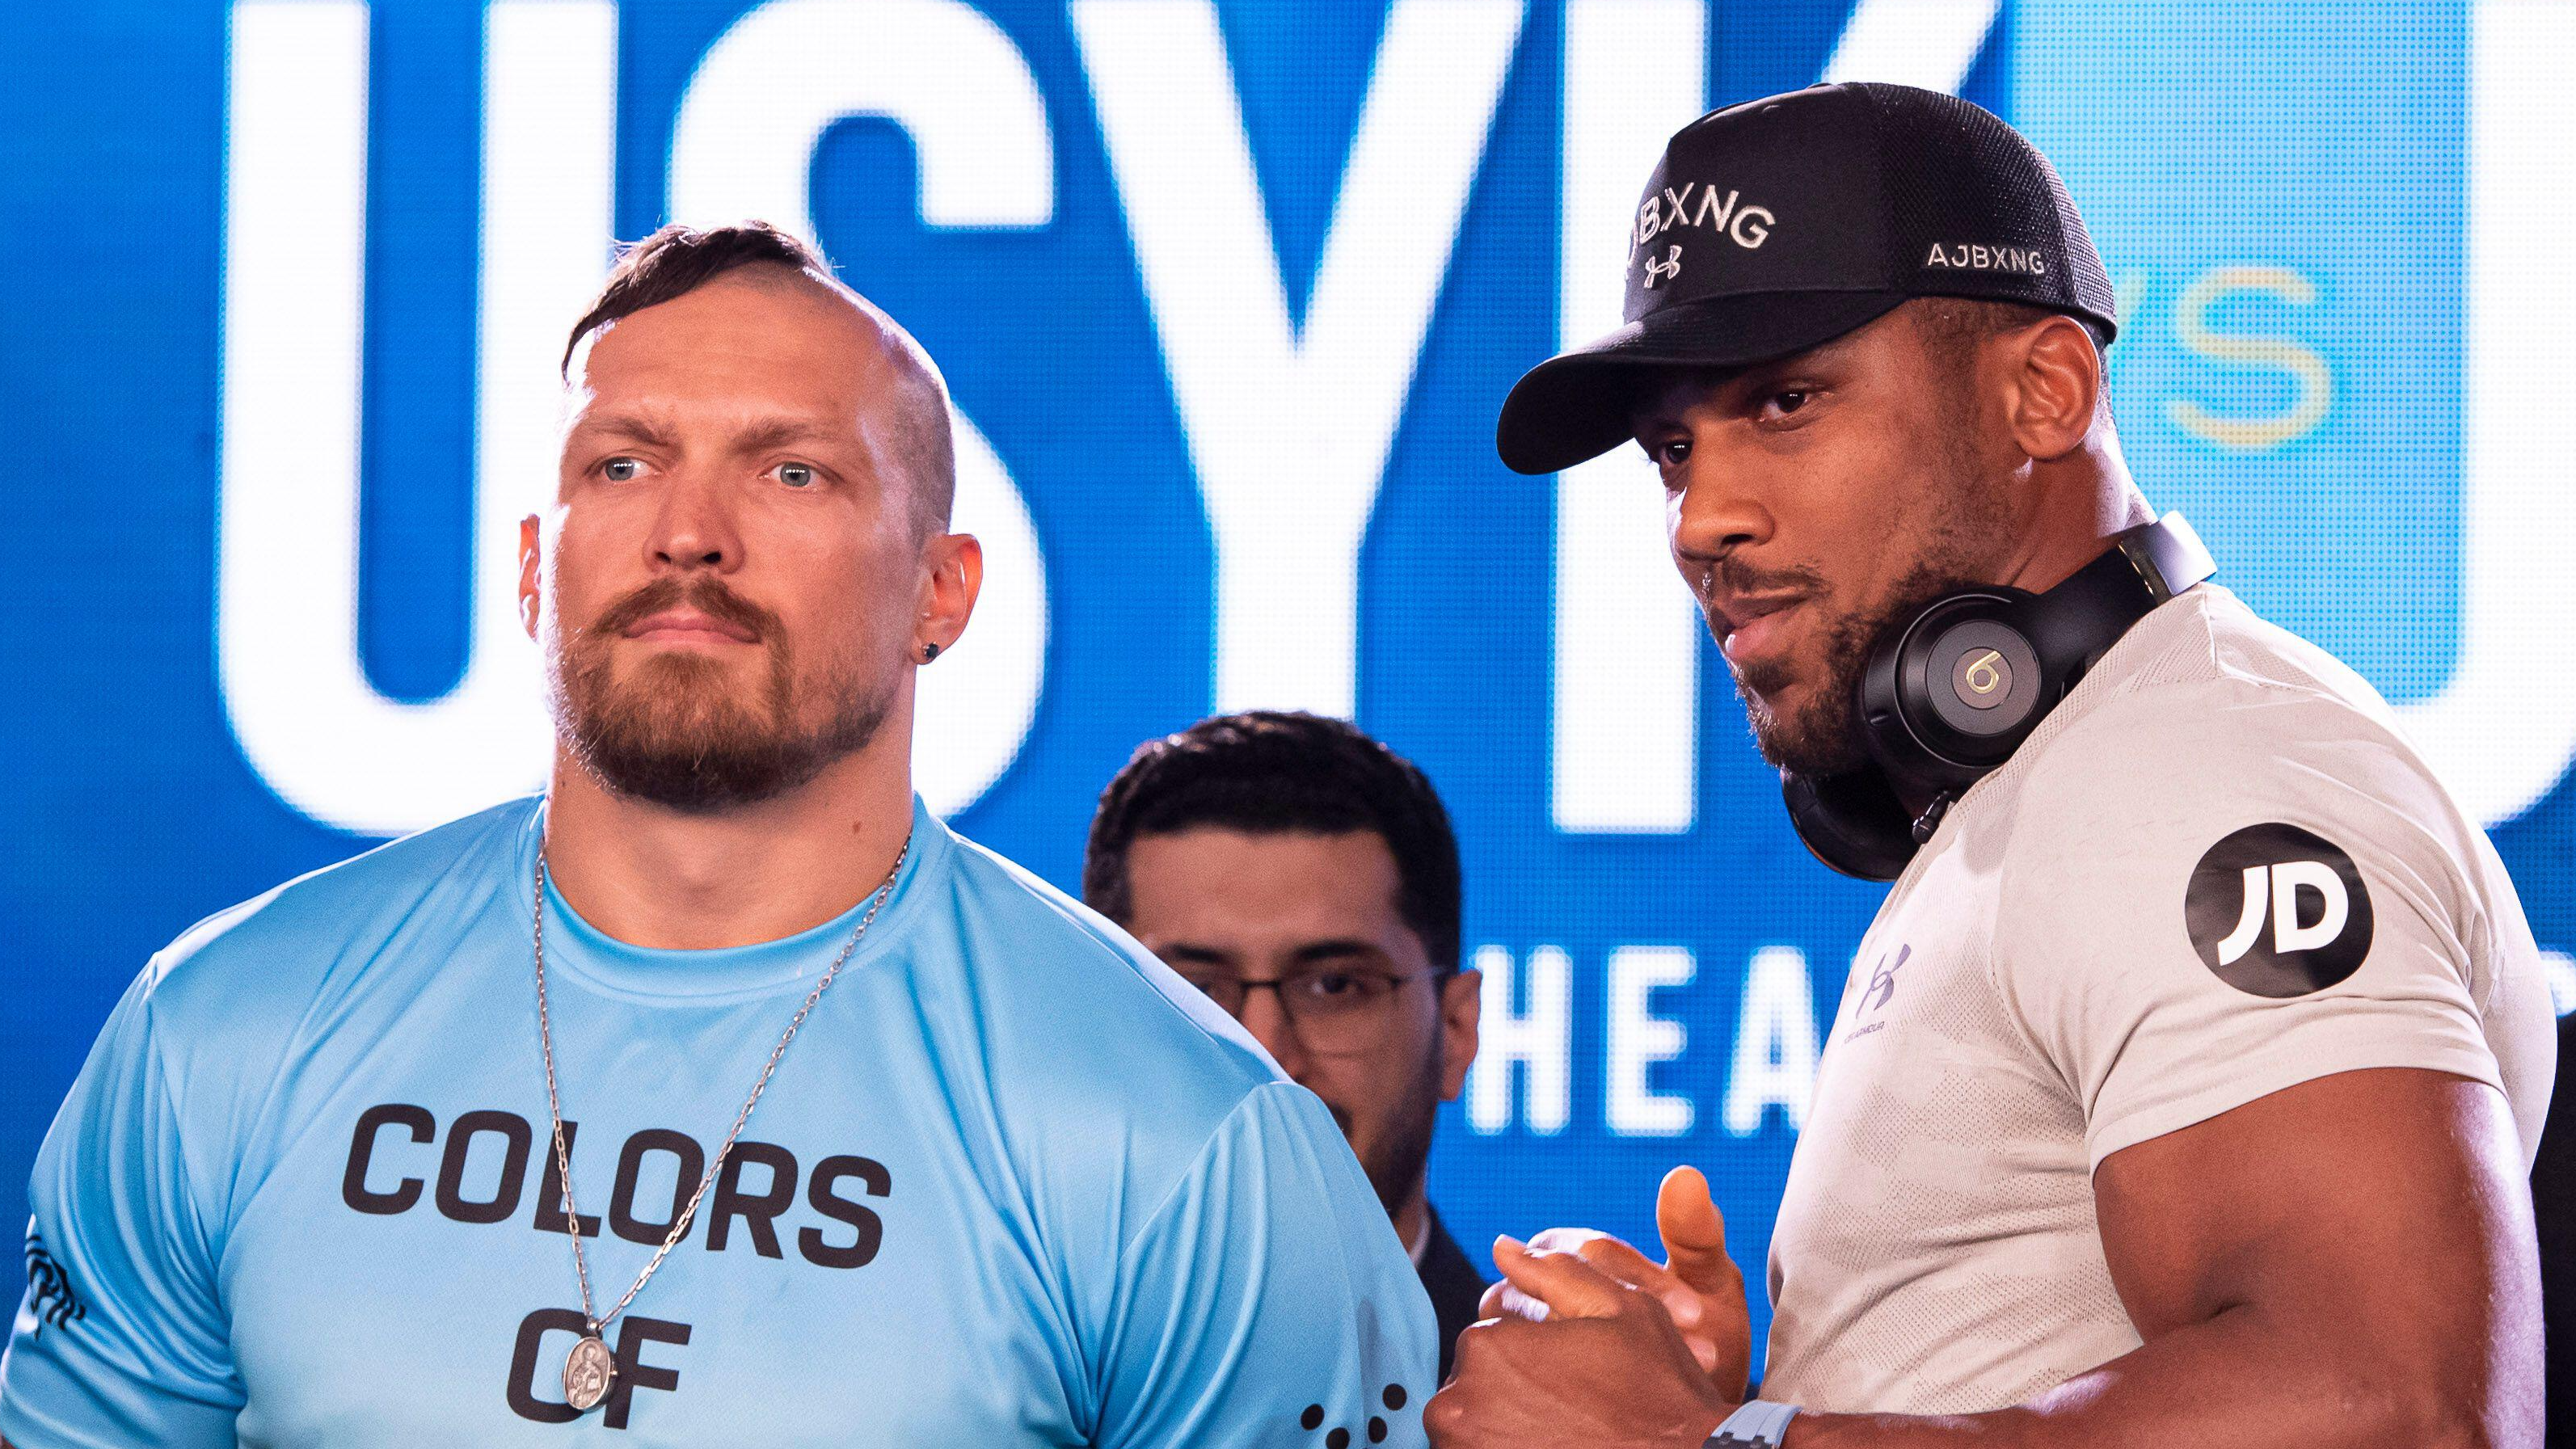 Anthony Joshua vs Usyk live stream TV, start time and undercard